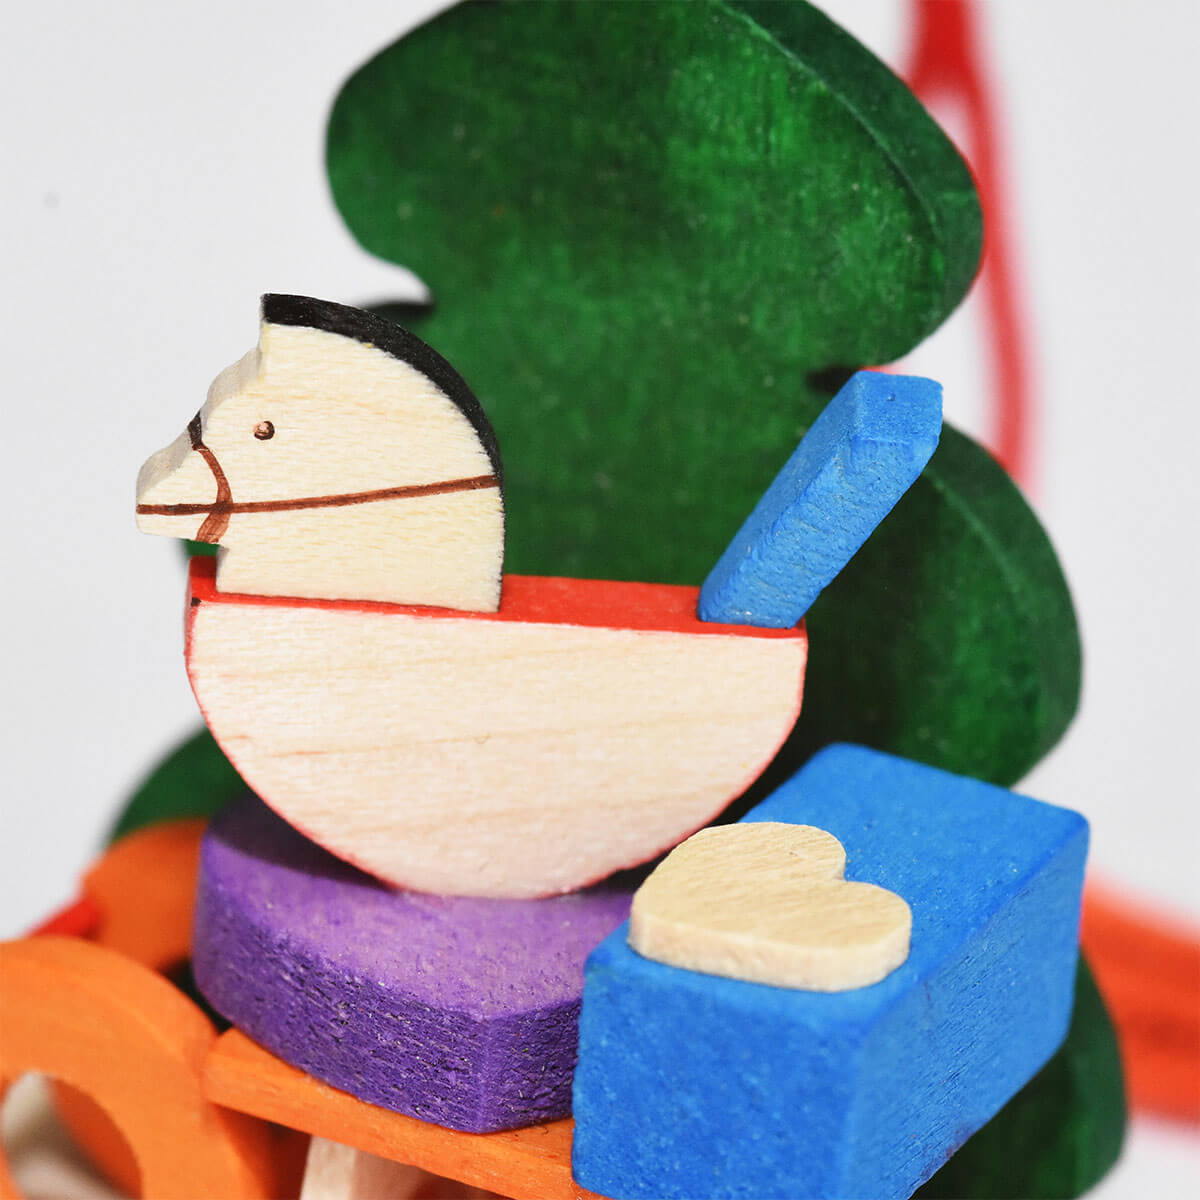 Christmas Tree & Gifts Ornament with tricycle